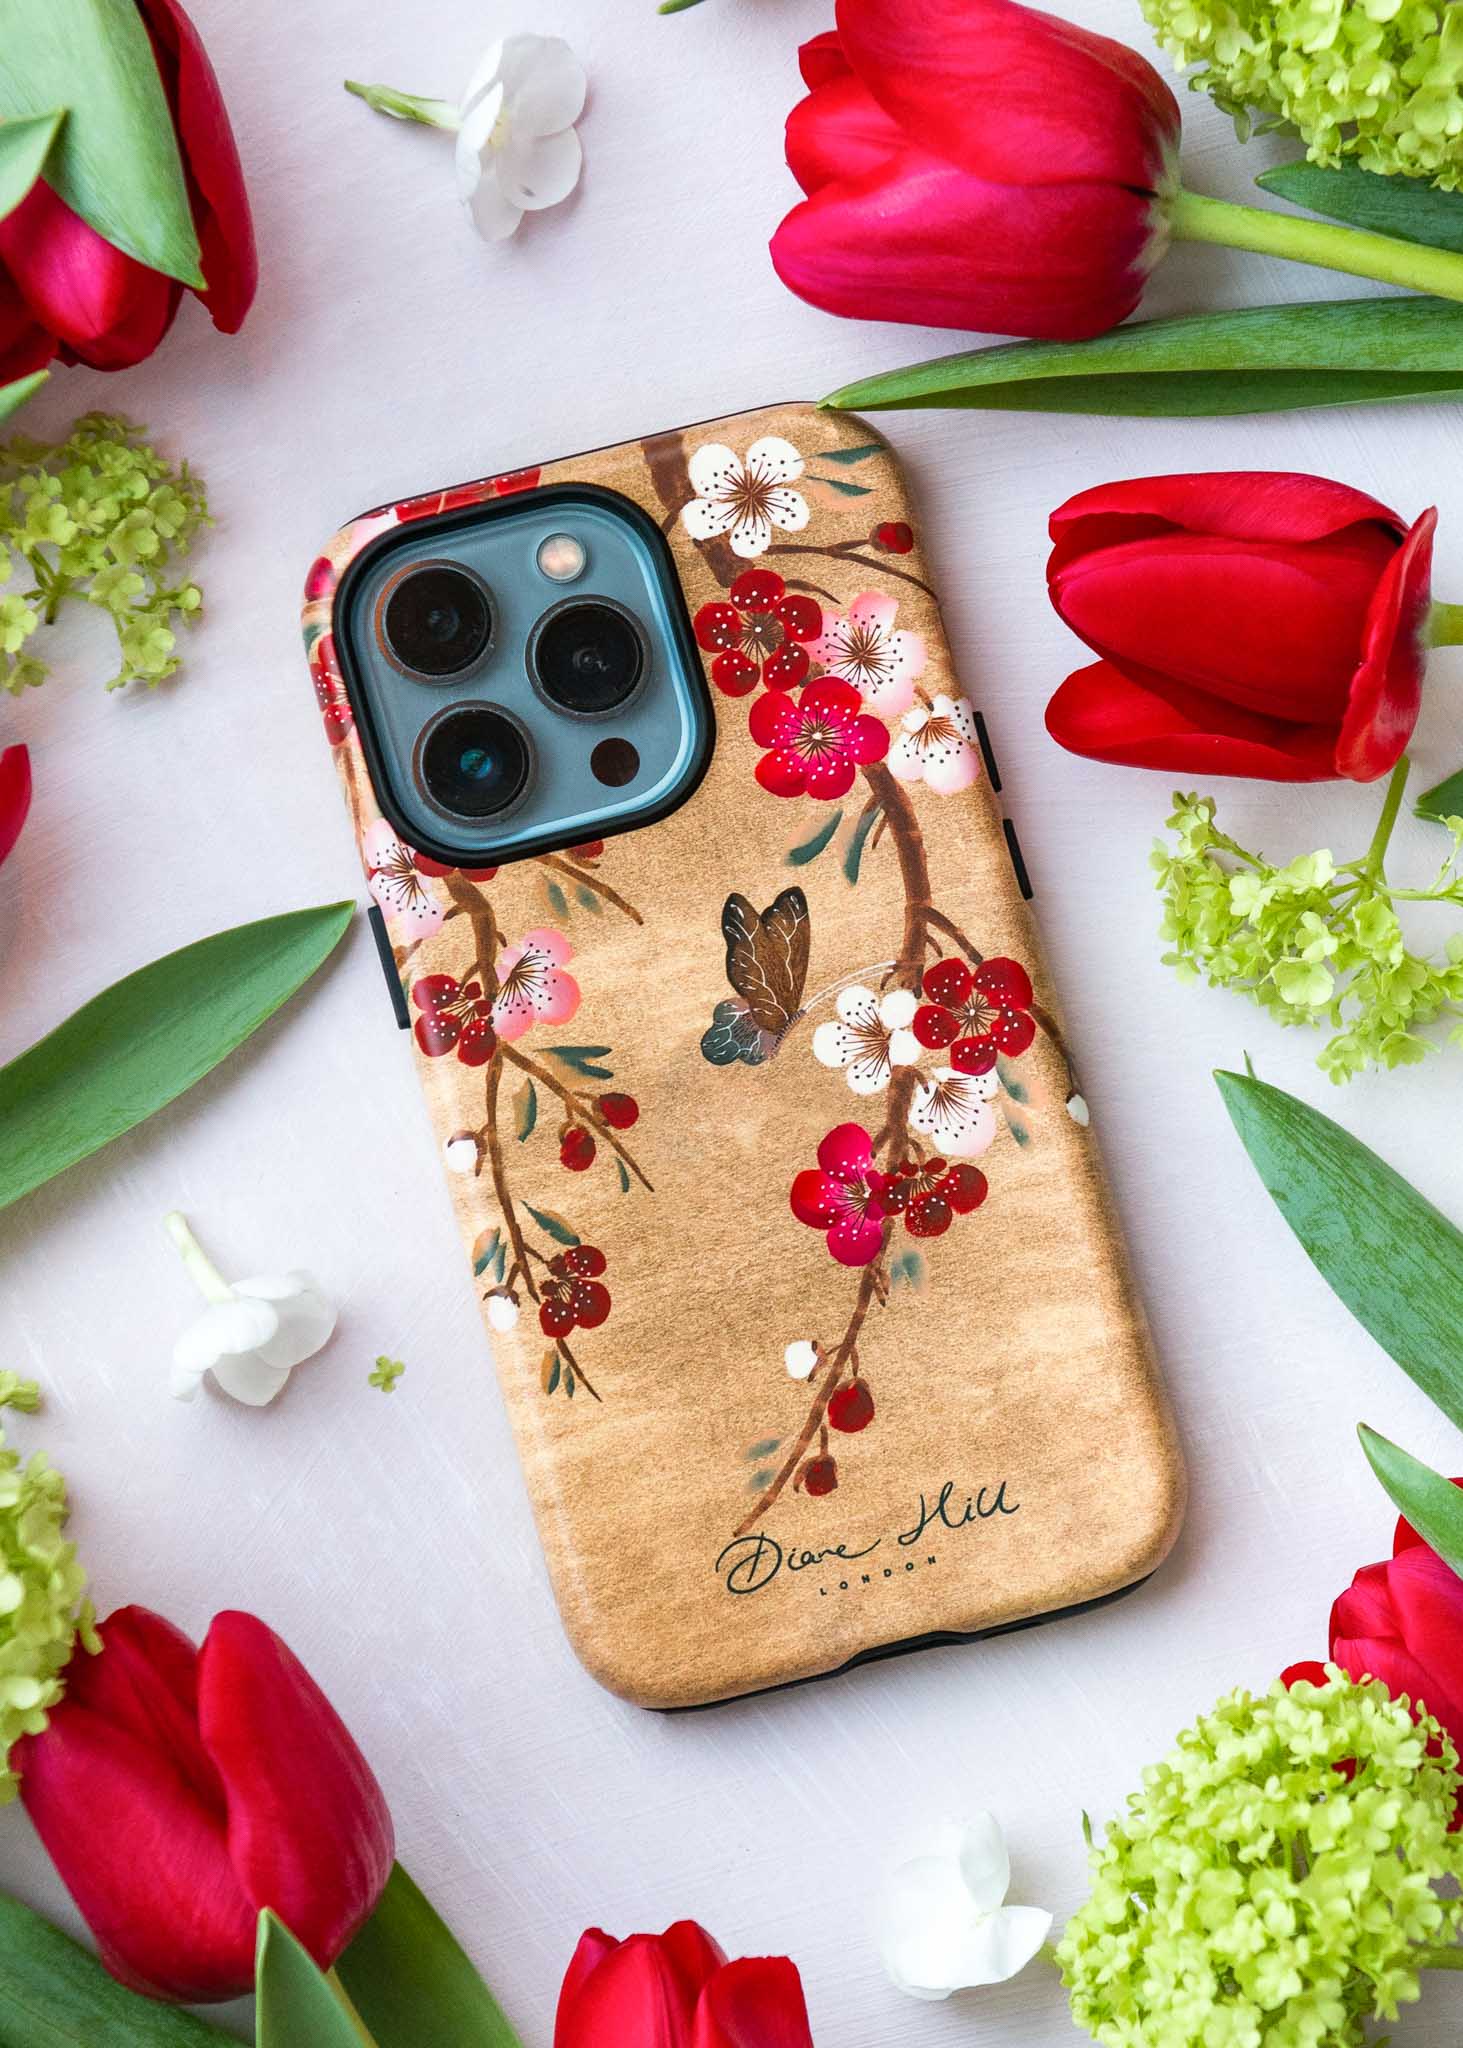 Luxury chinoiserie phone case design by Diane Hill on a flat background surrounded by red flowers